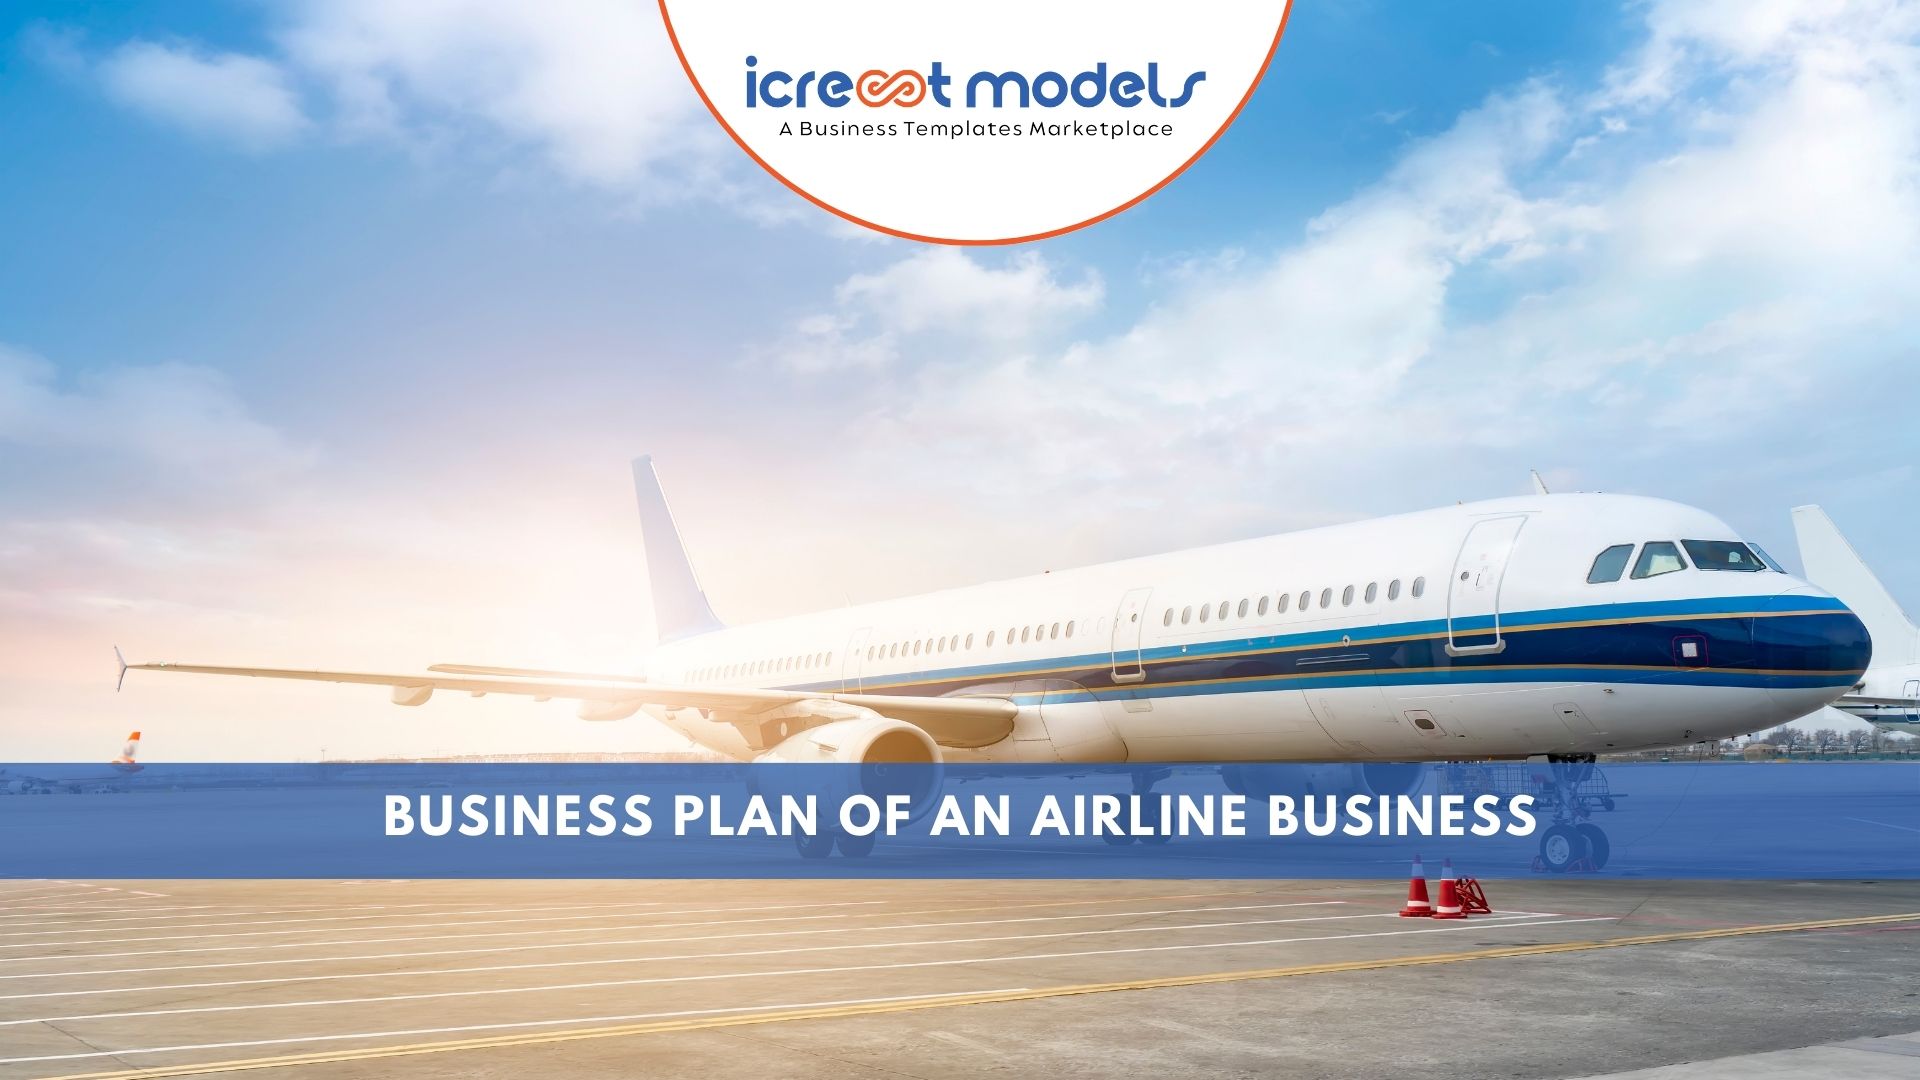 Business Plan of an Airline Business